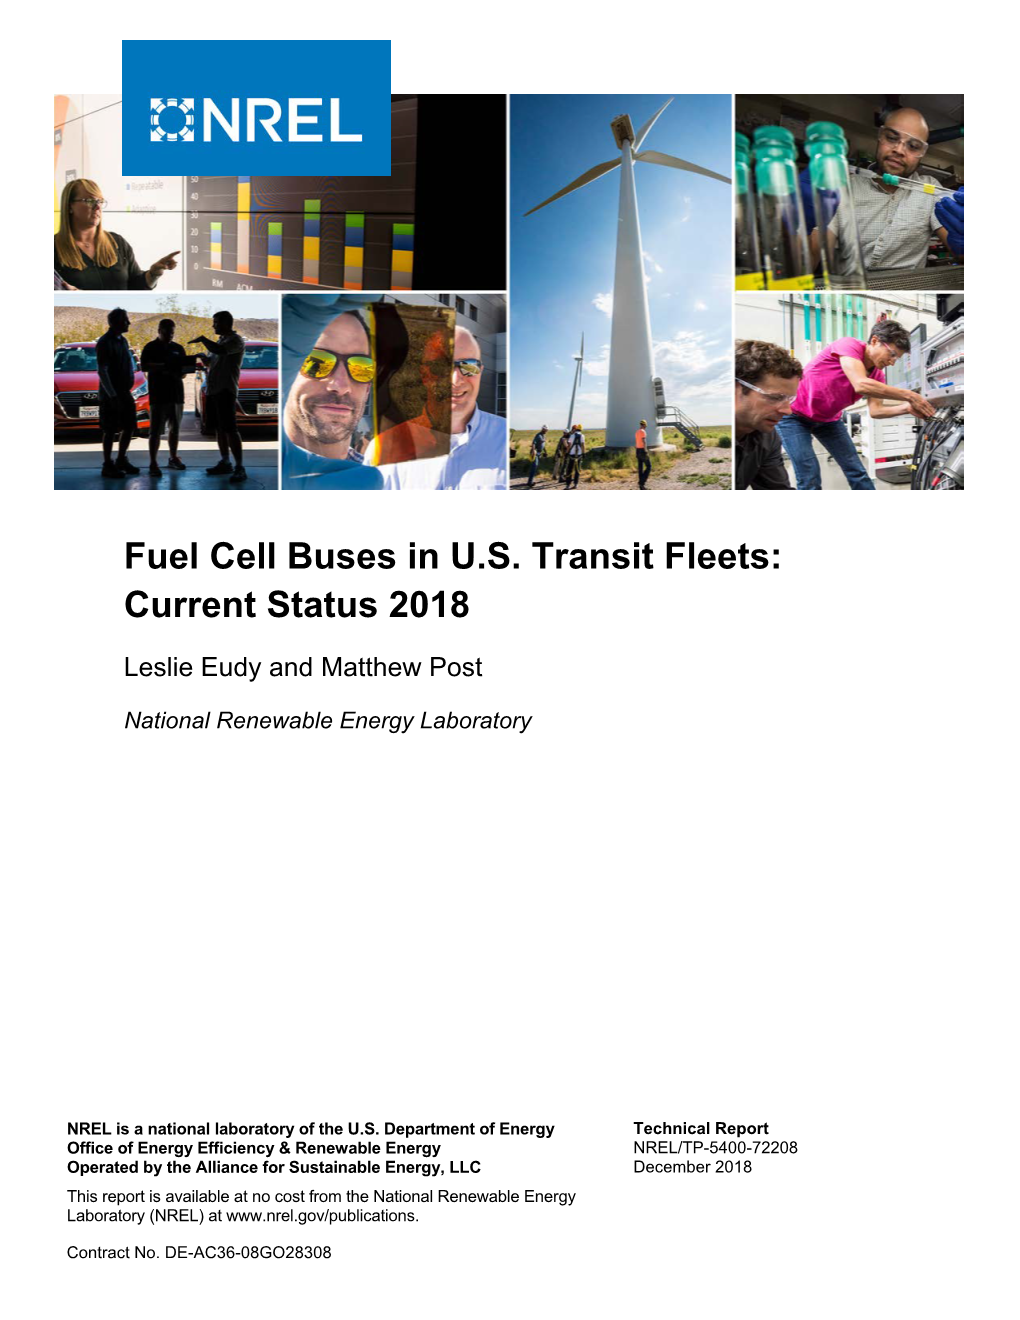 Fuel Cell Buses in U.S. Transit Fleets: Current Status 2018